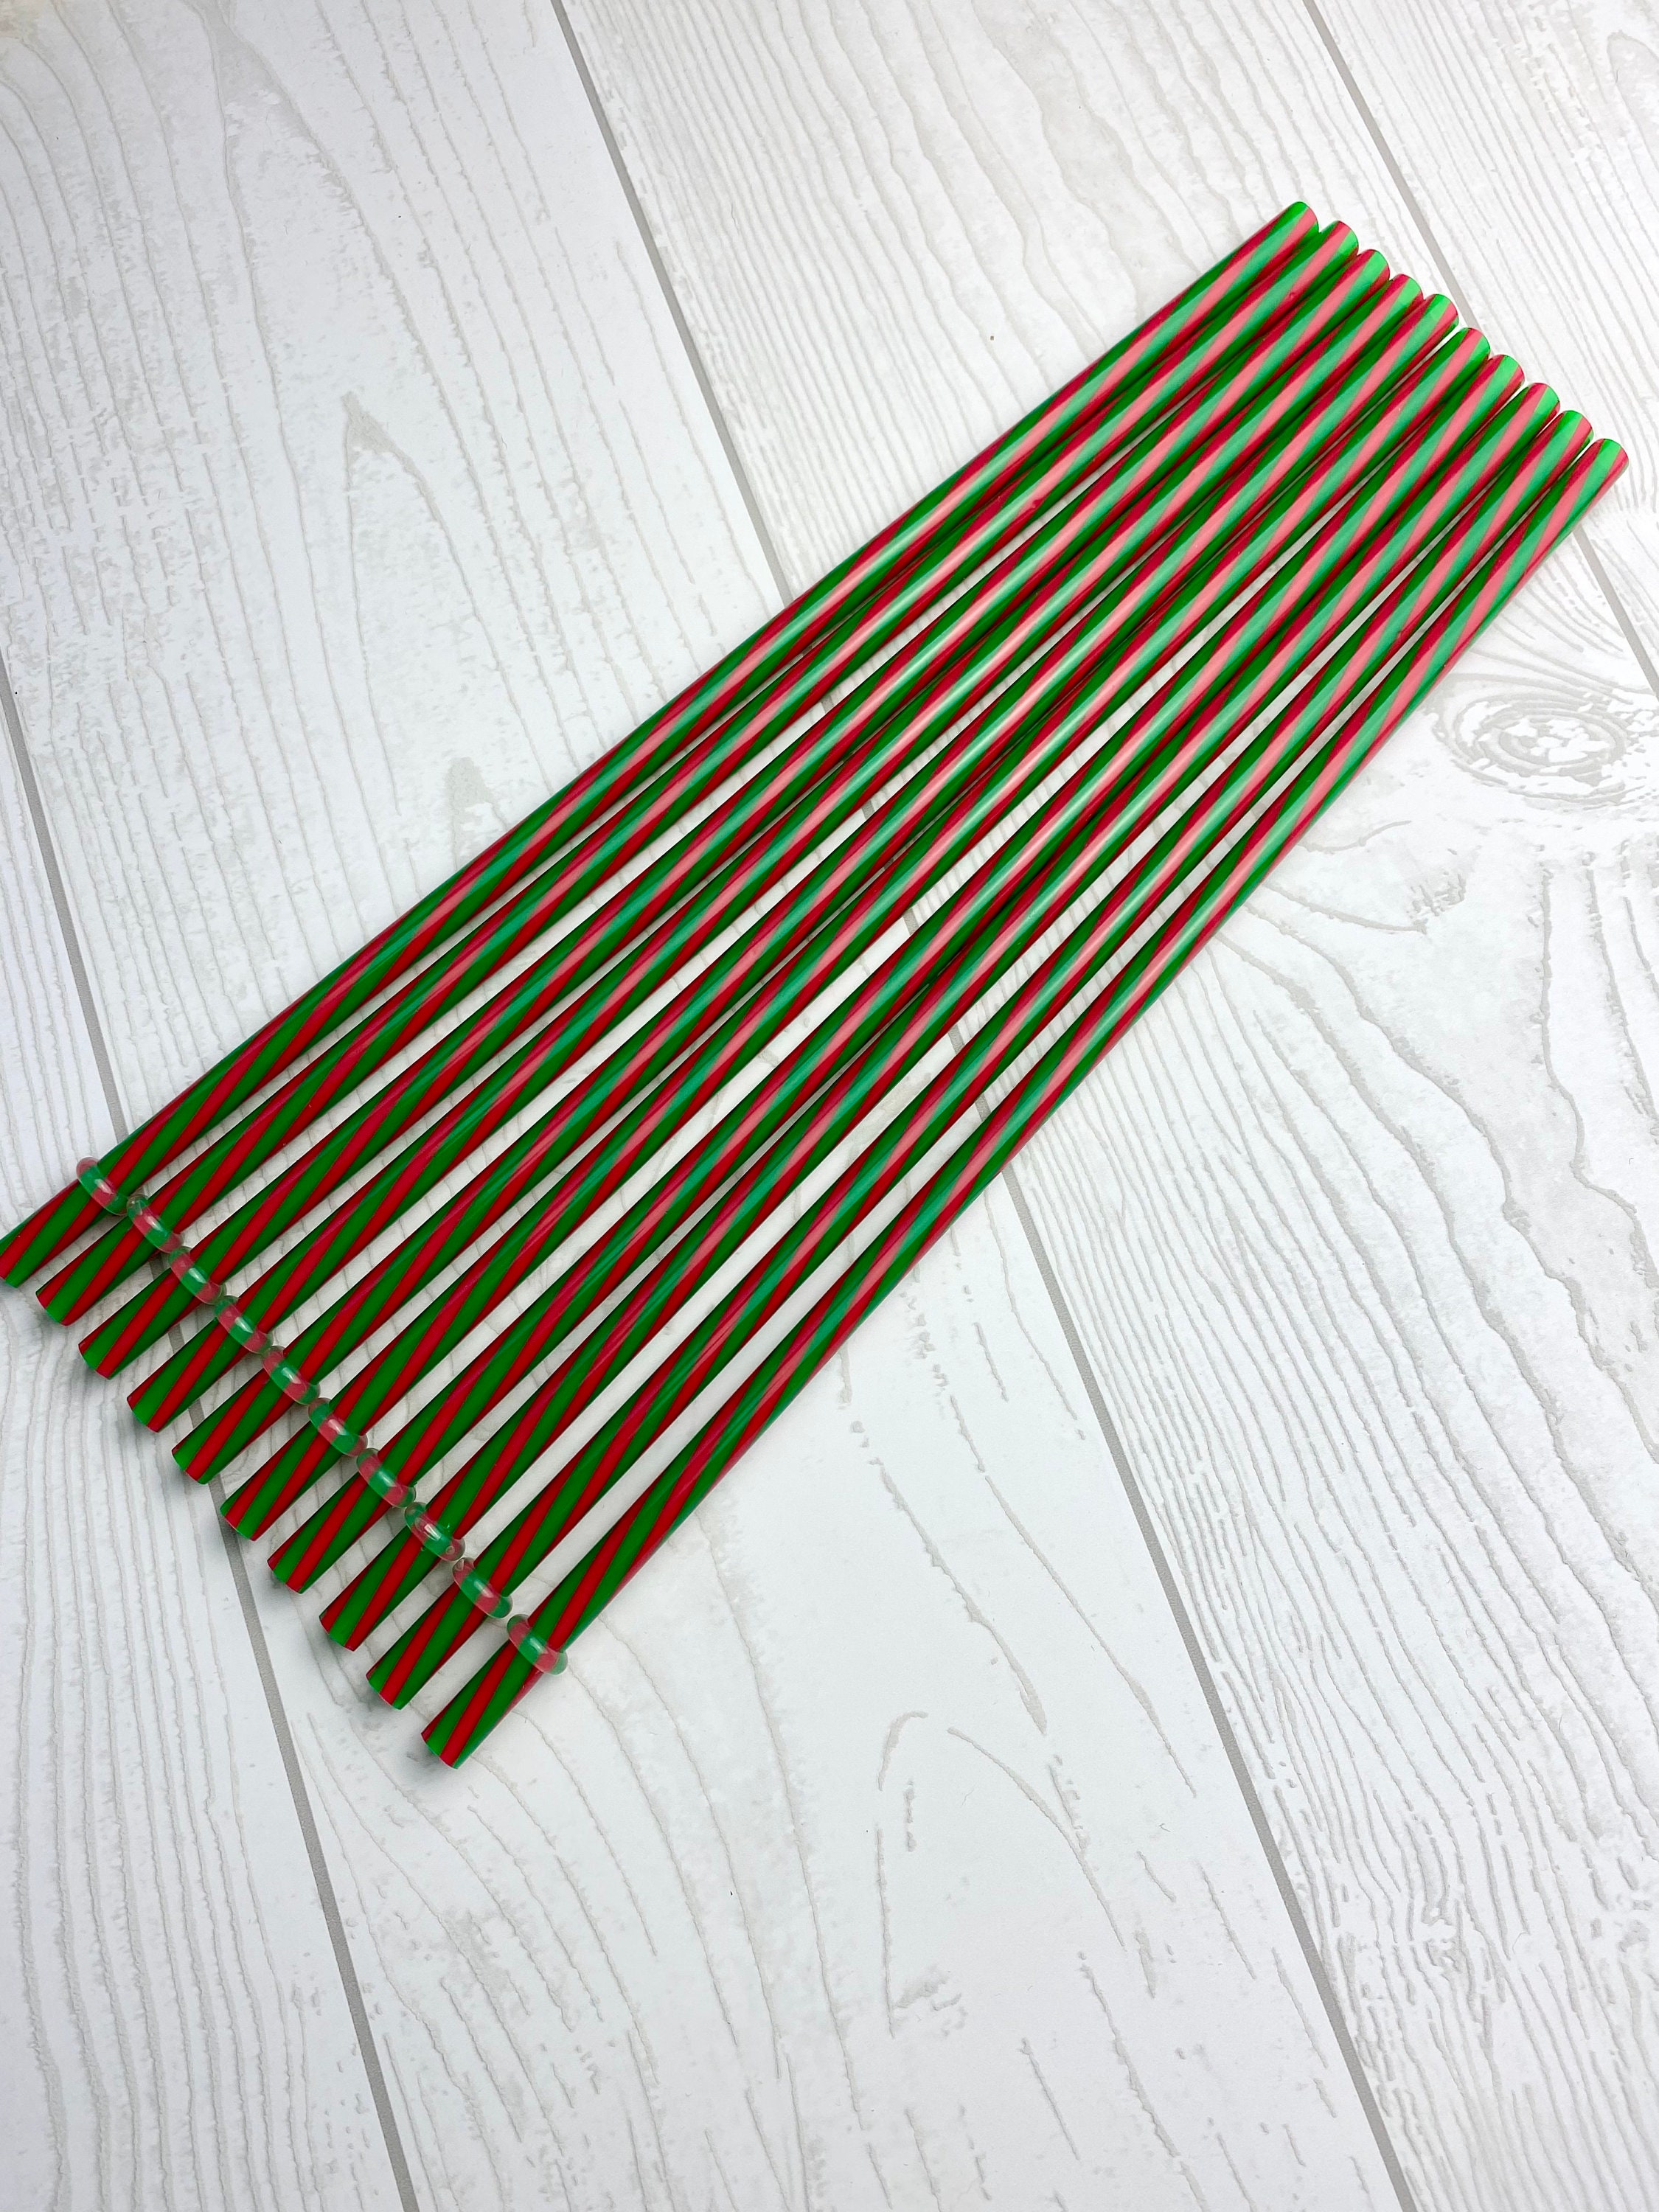 10 Red / Green Plastic Reusable Drinking Straws - 10 - Party -  Entertaining - Christmas - Holiday